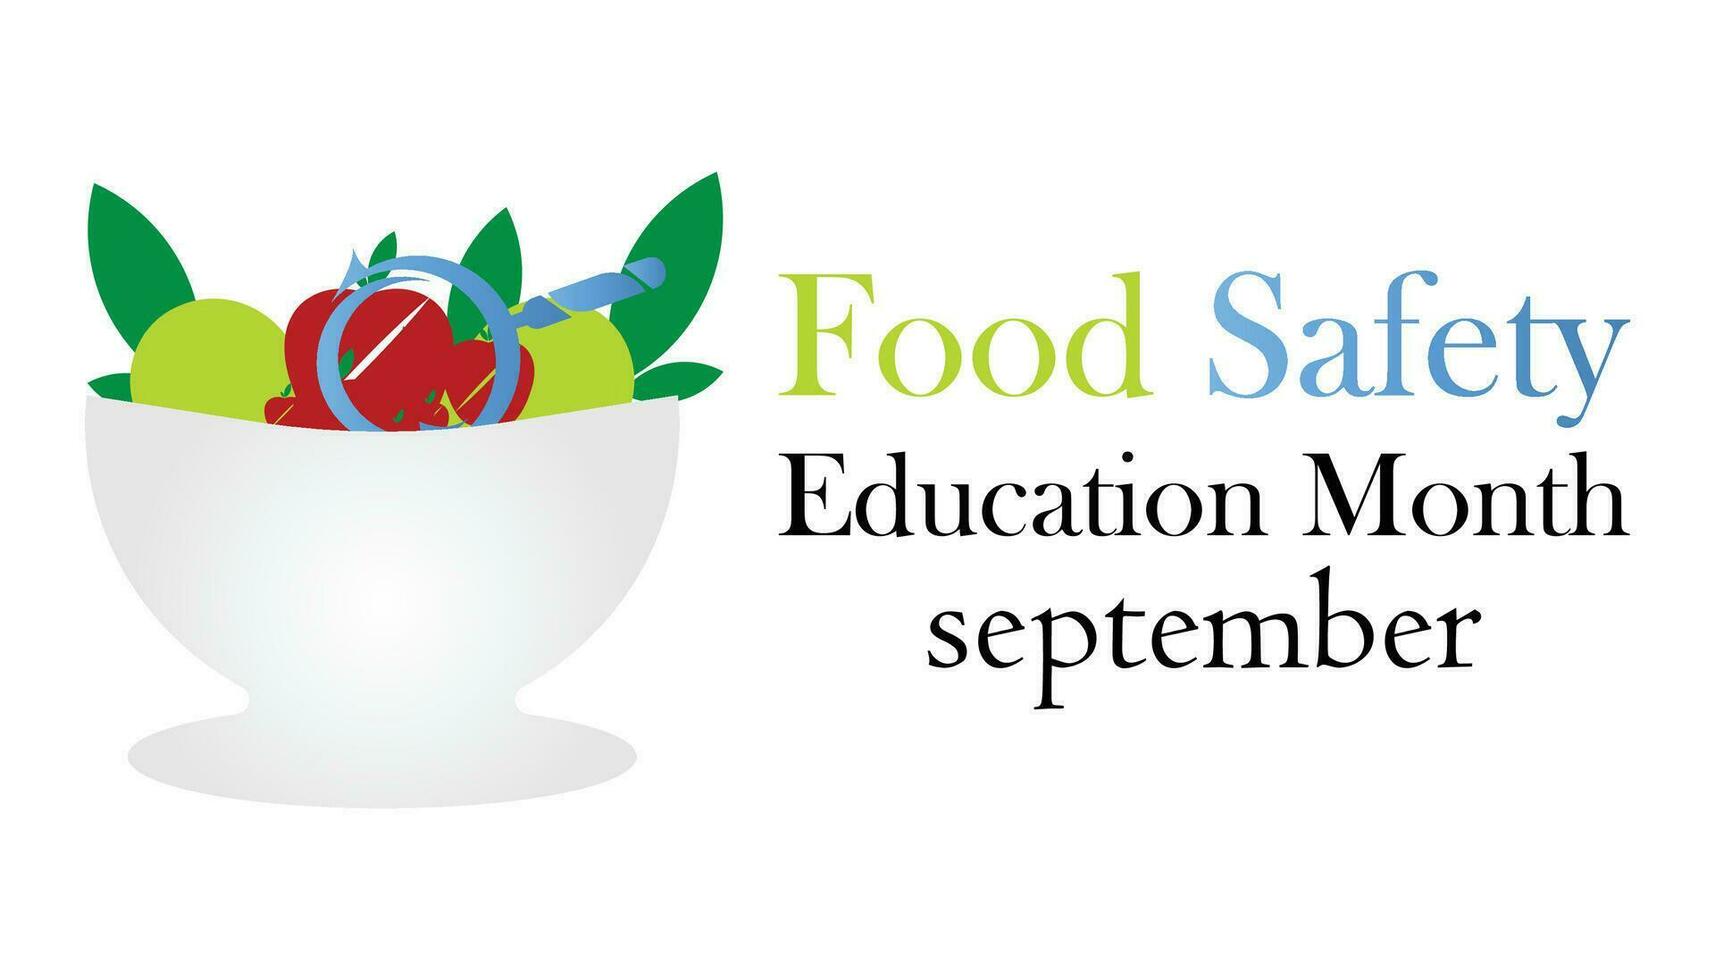 Food Safety education month observed each year during September . Vector illustration on the theme of .